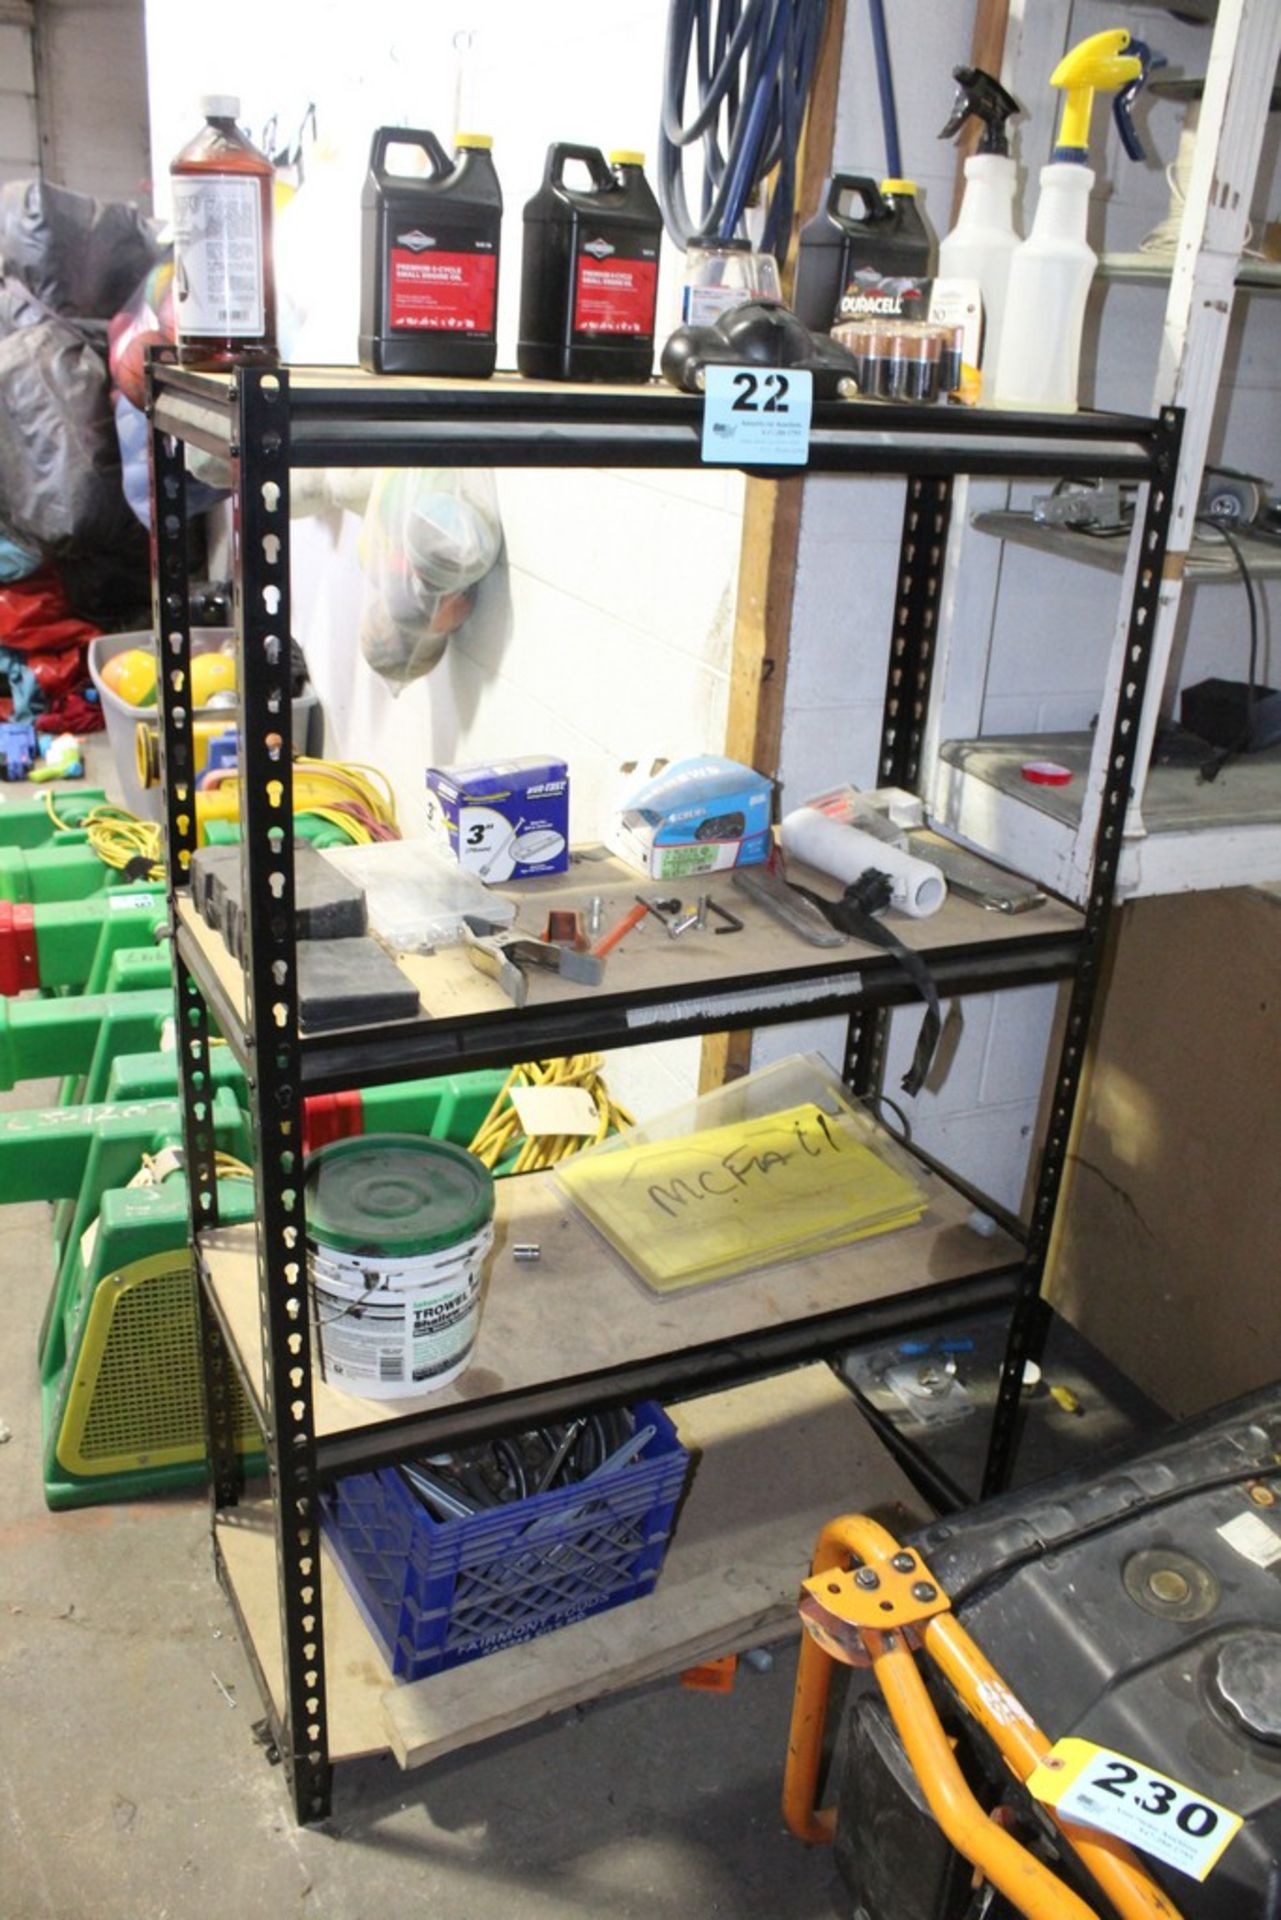 STEEL SHELVING UNIT WITH CONTENTS-58" X 36" X 18"